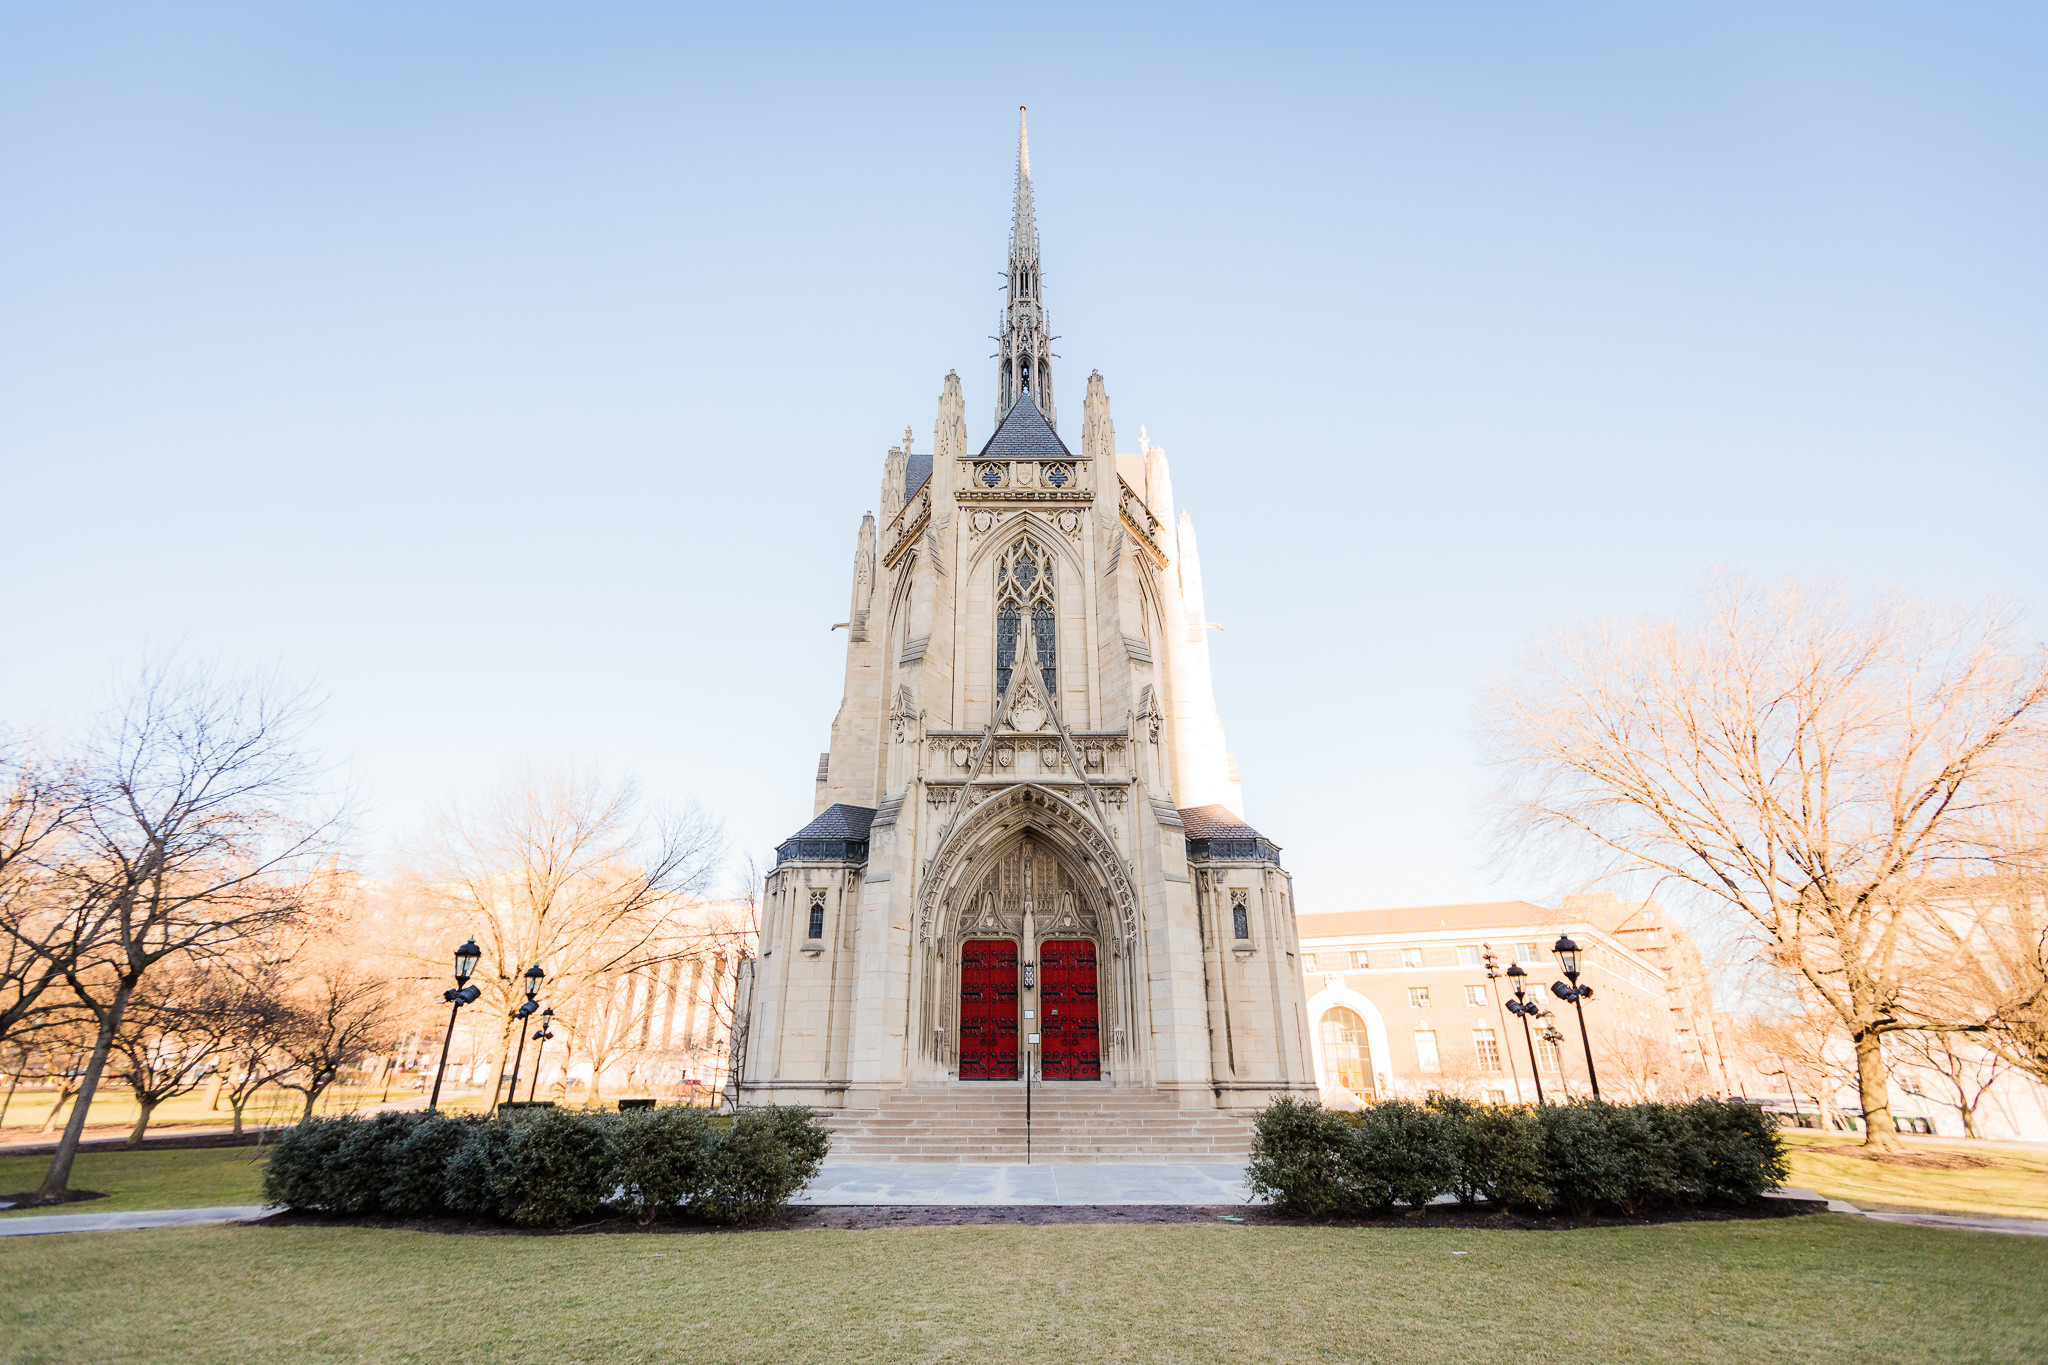 Heinz Memorial Chapel on a sunny winter day in February